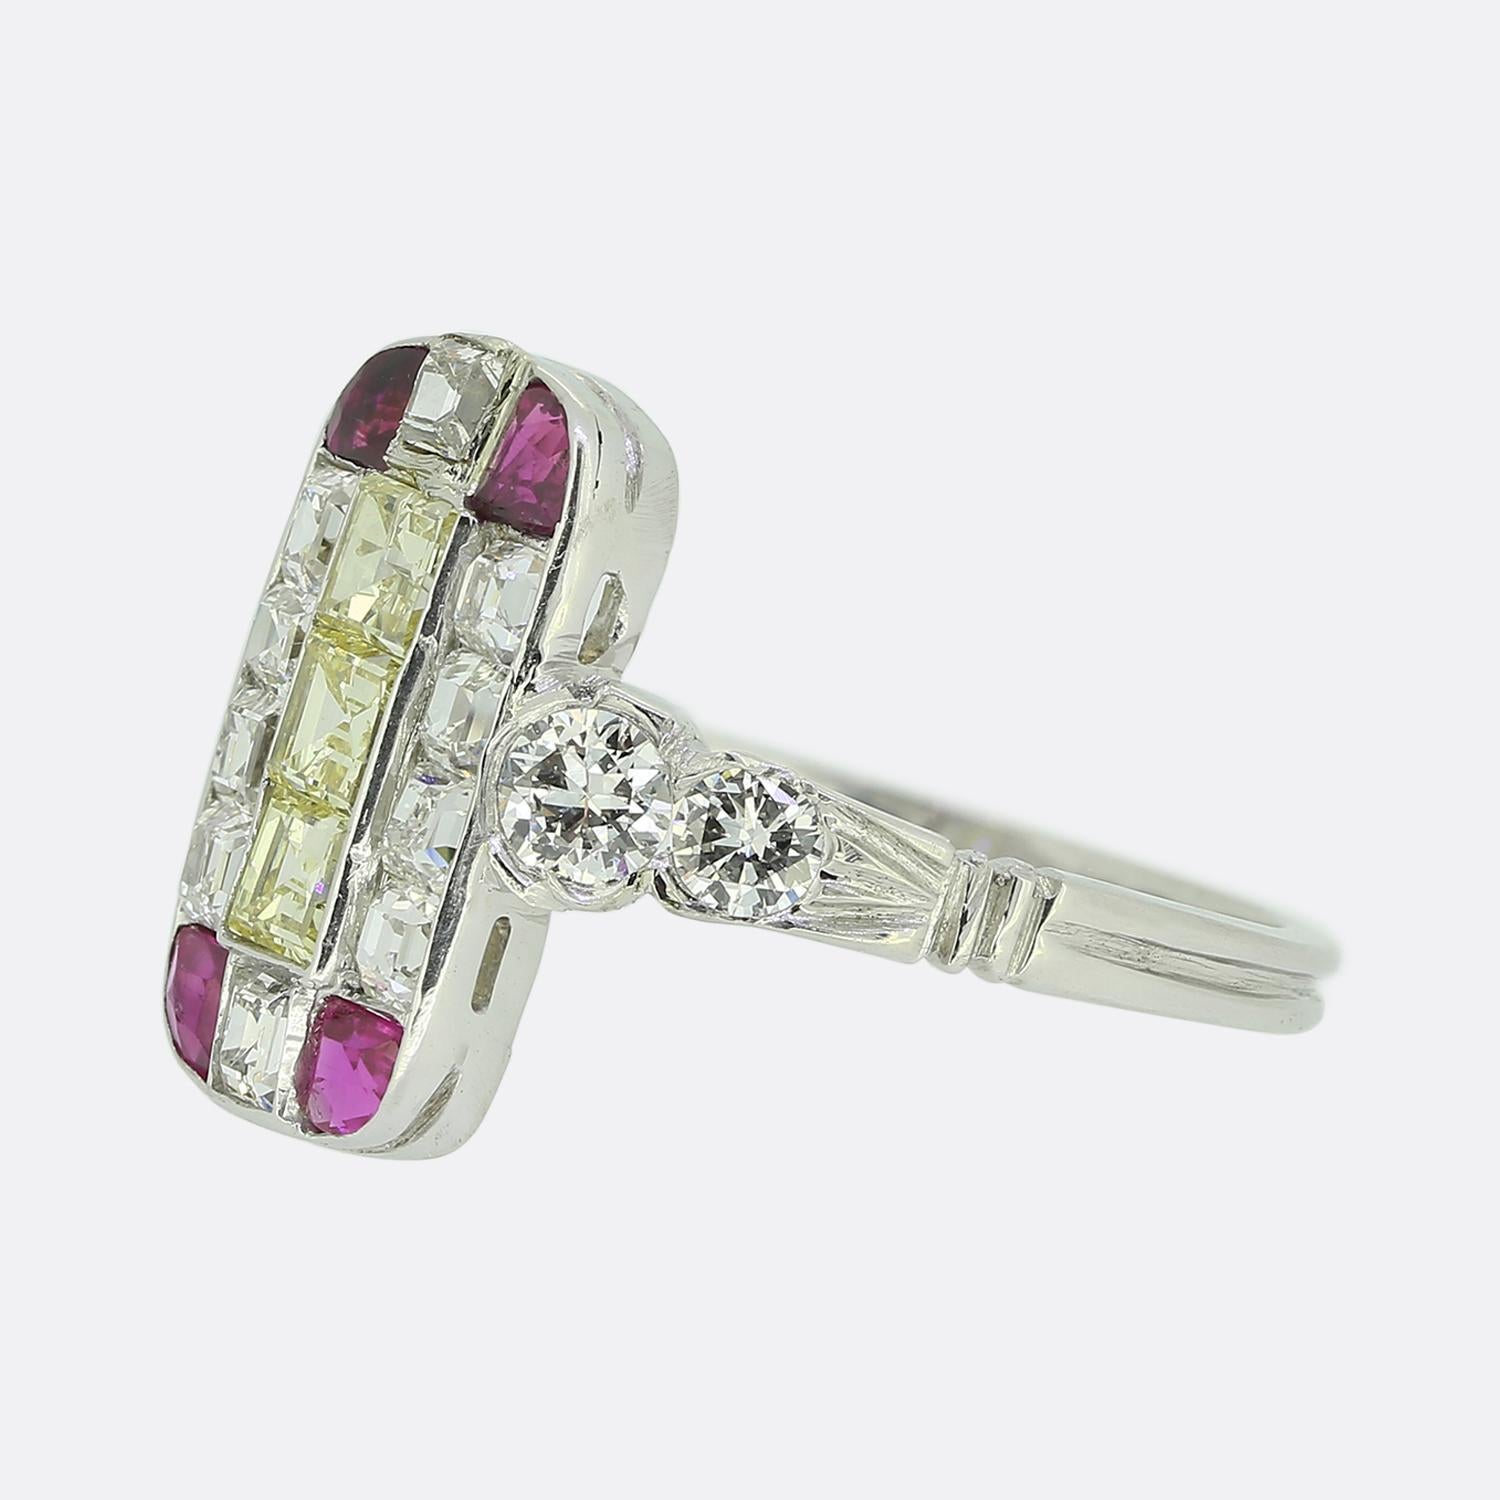 Here we have a superb ruby and diamond tablet ring crafted at a time when the Art Deco style was at the height of design. This platinum piece showcases an elongated oval face set with a geometric array of precious stones including yellow princess